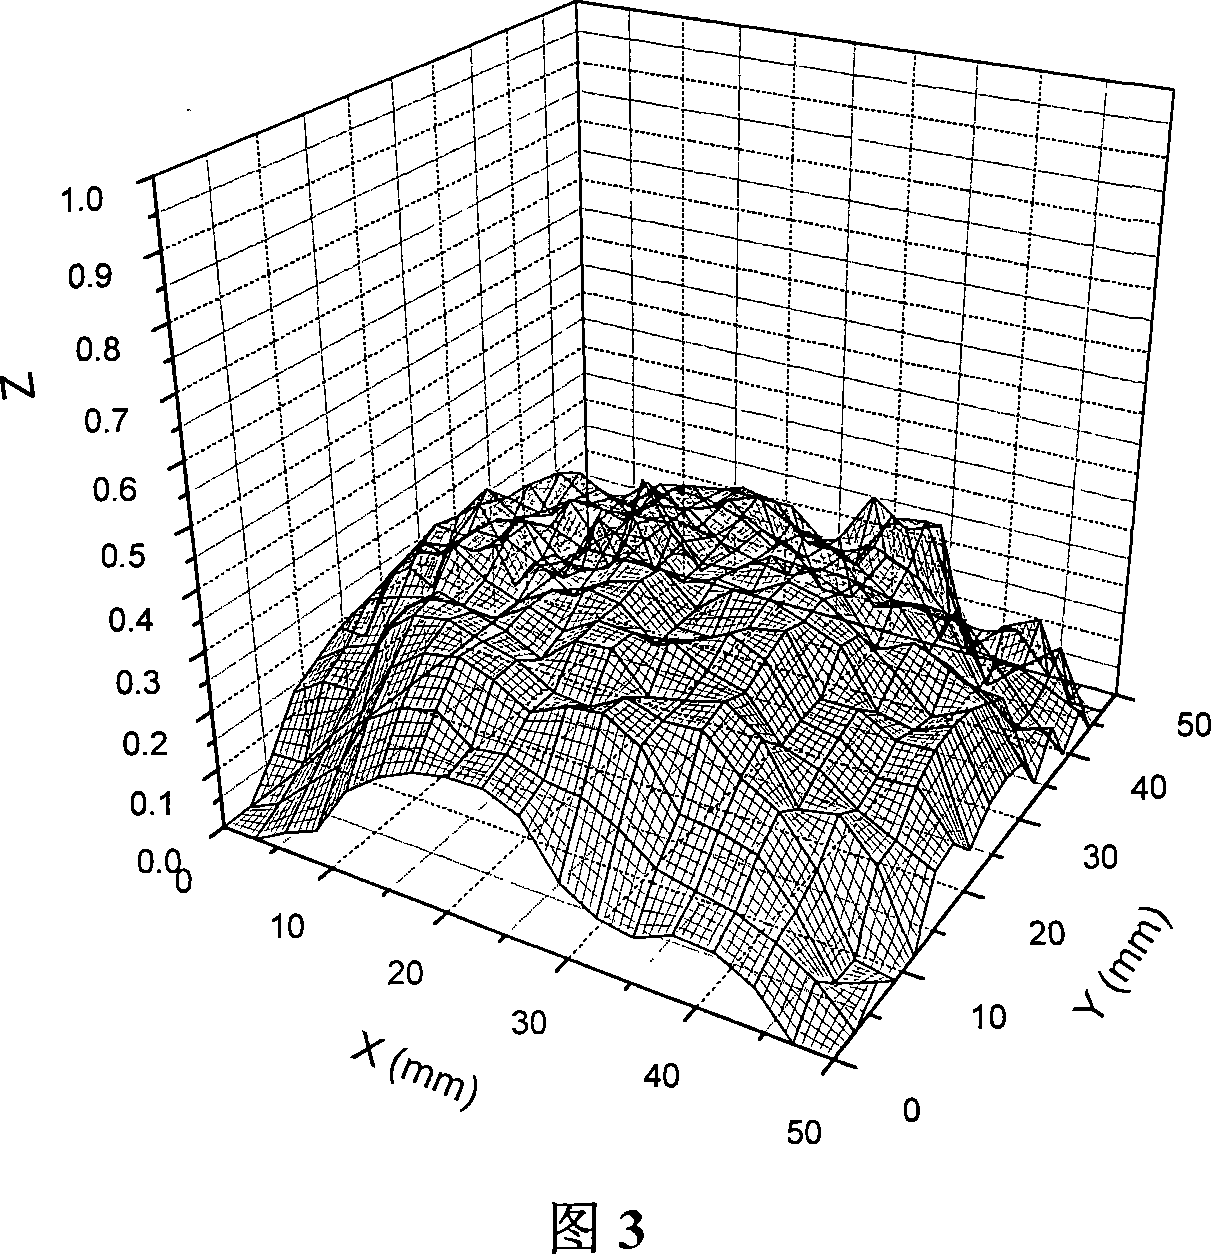 Semiconductor film material ultraviolet permeability uniformity test system